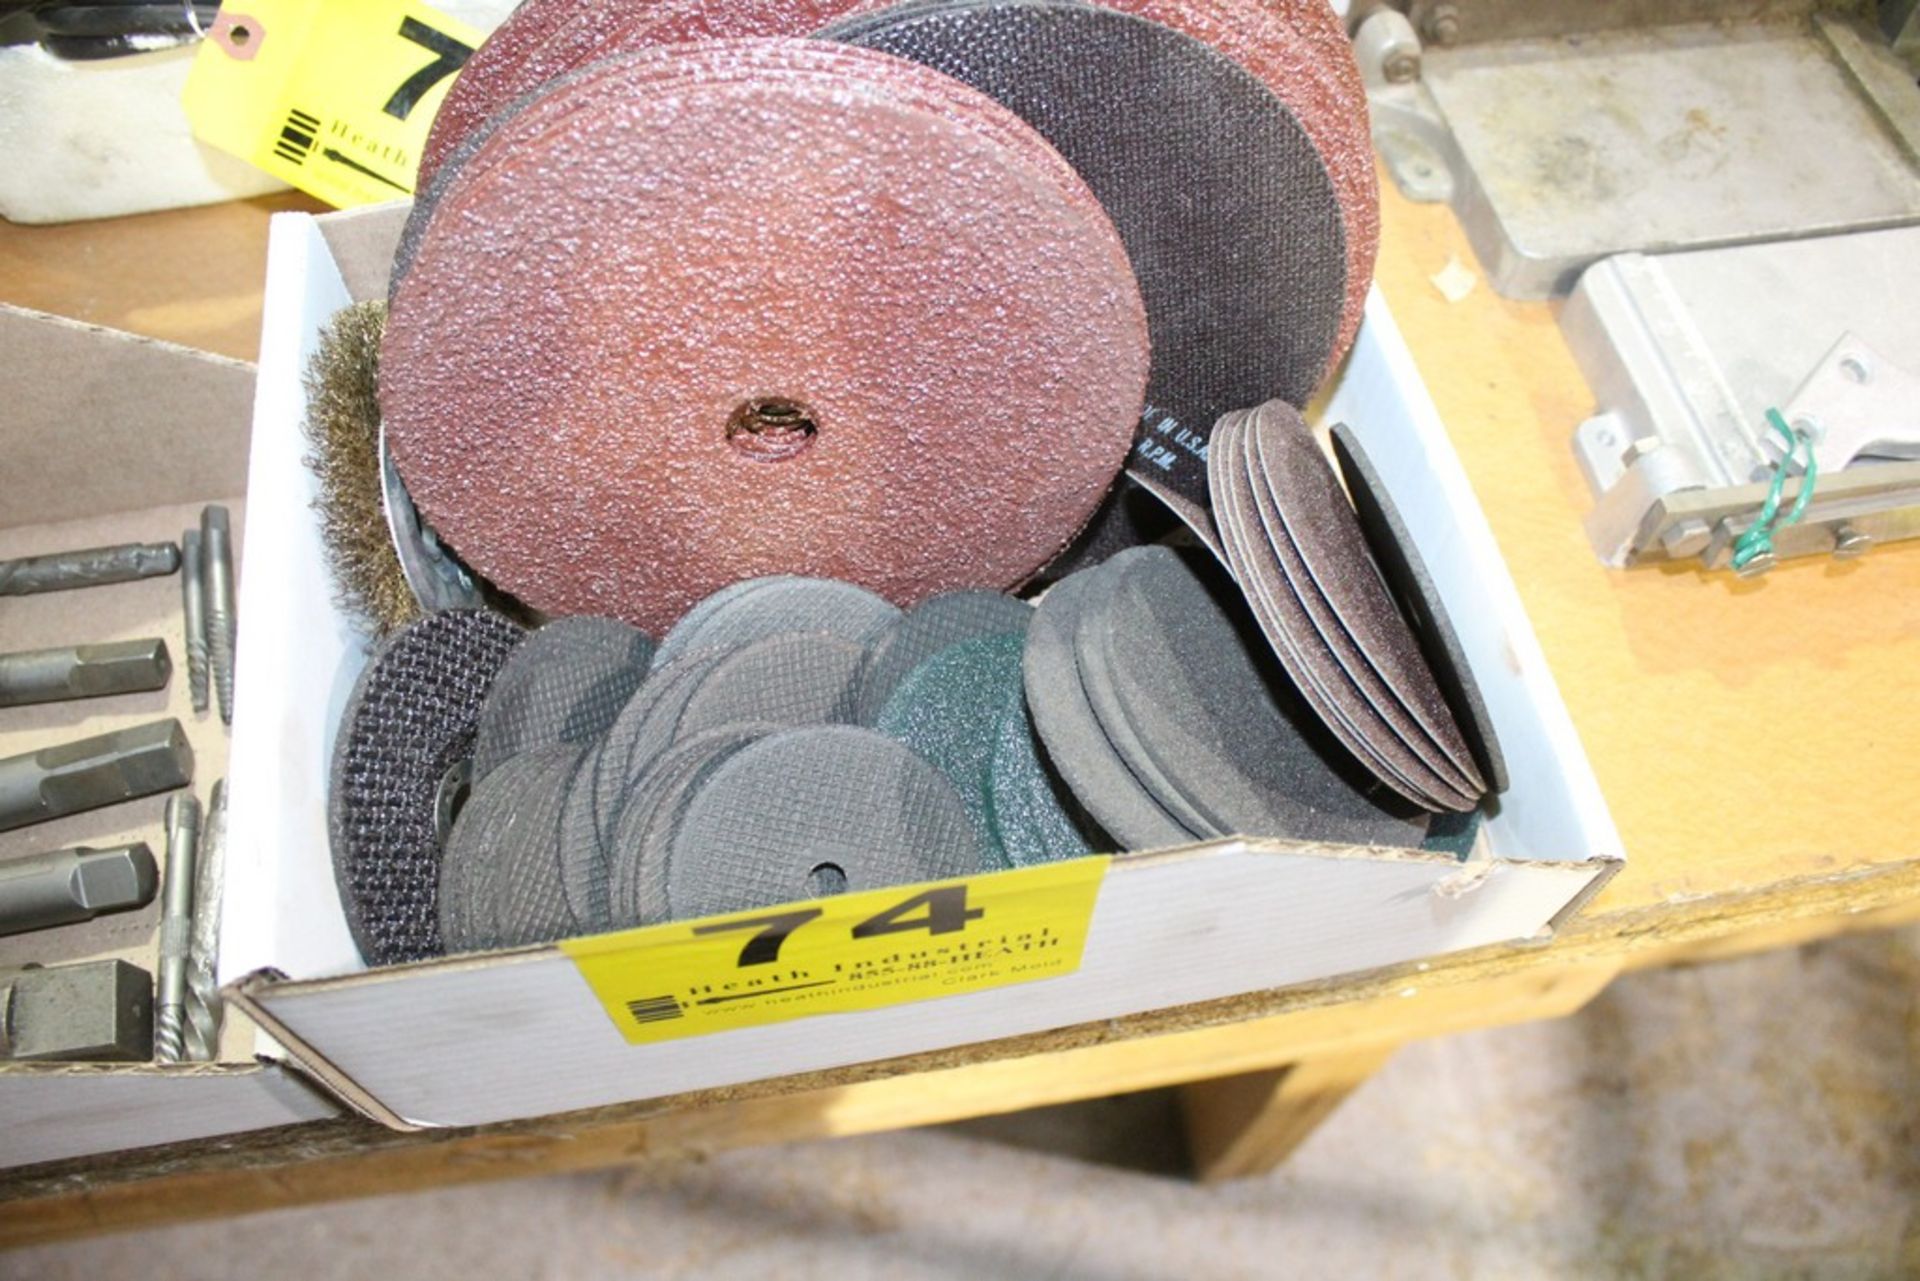 LARGE QUANTITY OF ABRASIVE DISKS AND 3" CUT OFF WHEELS